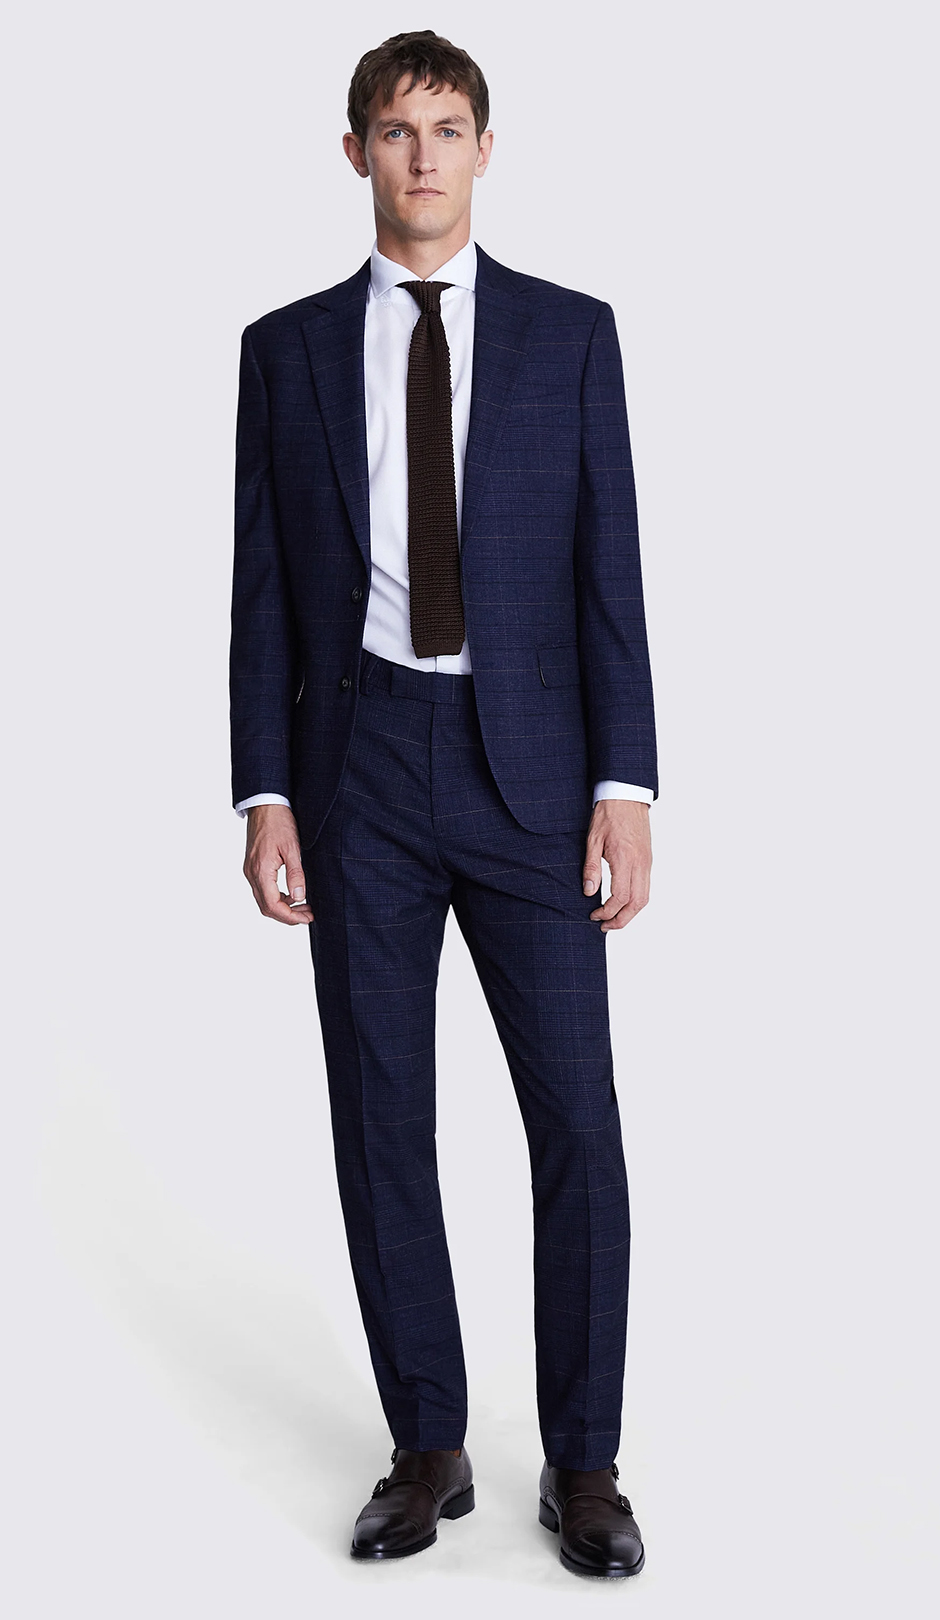 Navy and black check groom suit from Moss Bros